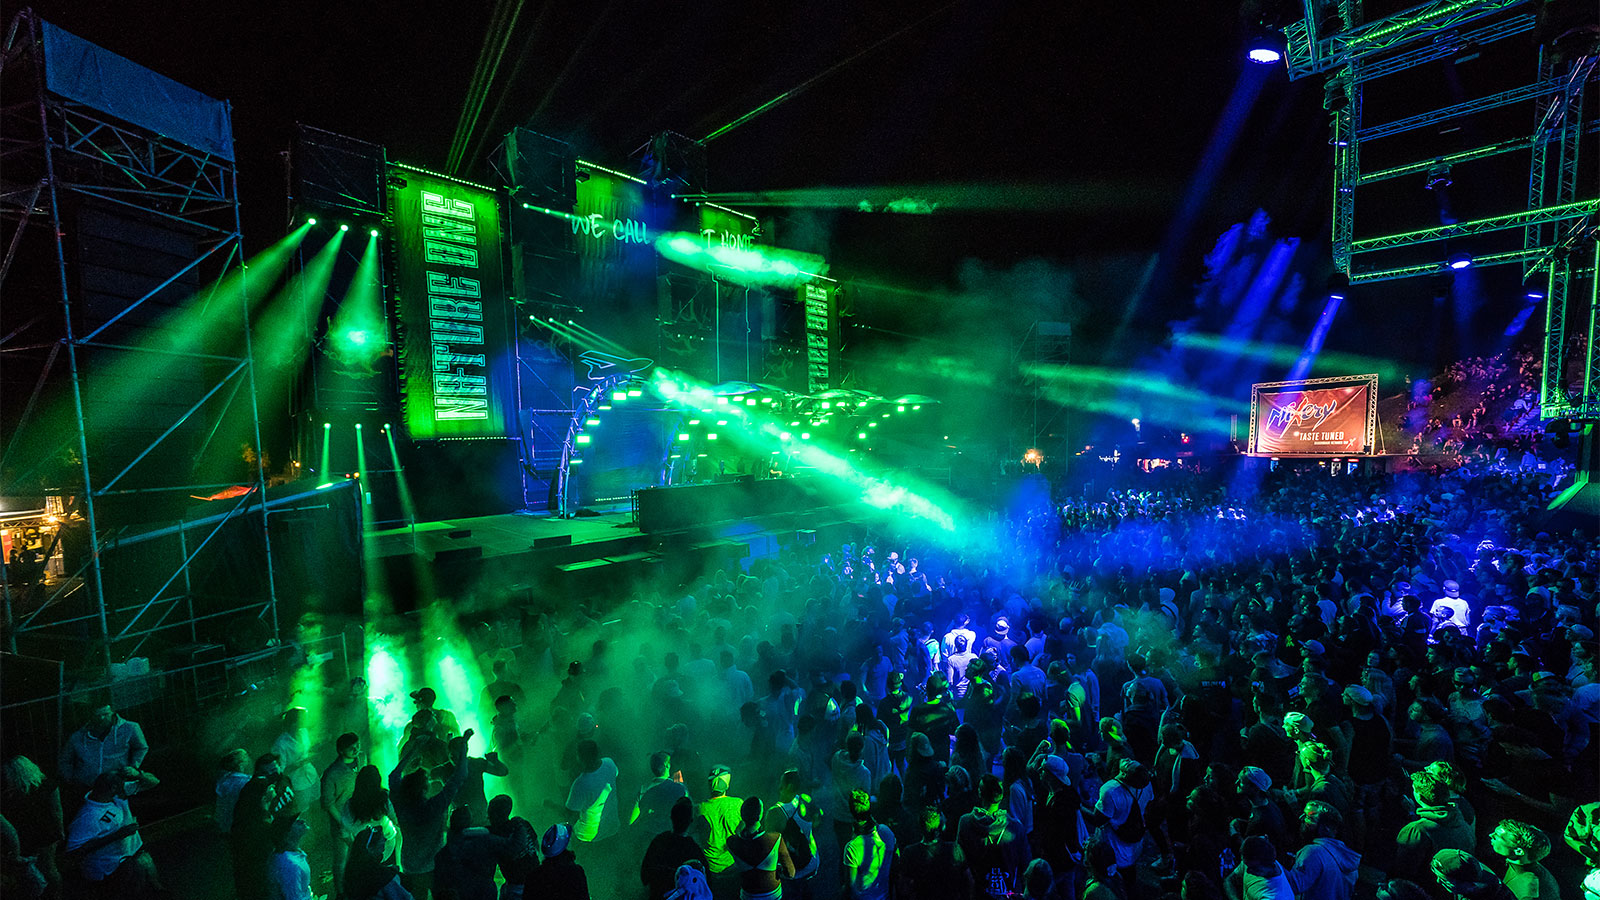 Glp JDC1 adds pulse to massive Nature One Electronic Festival